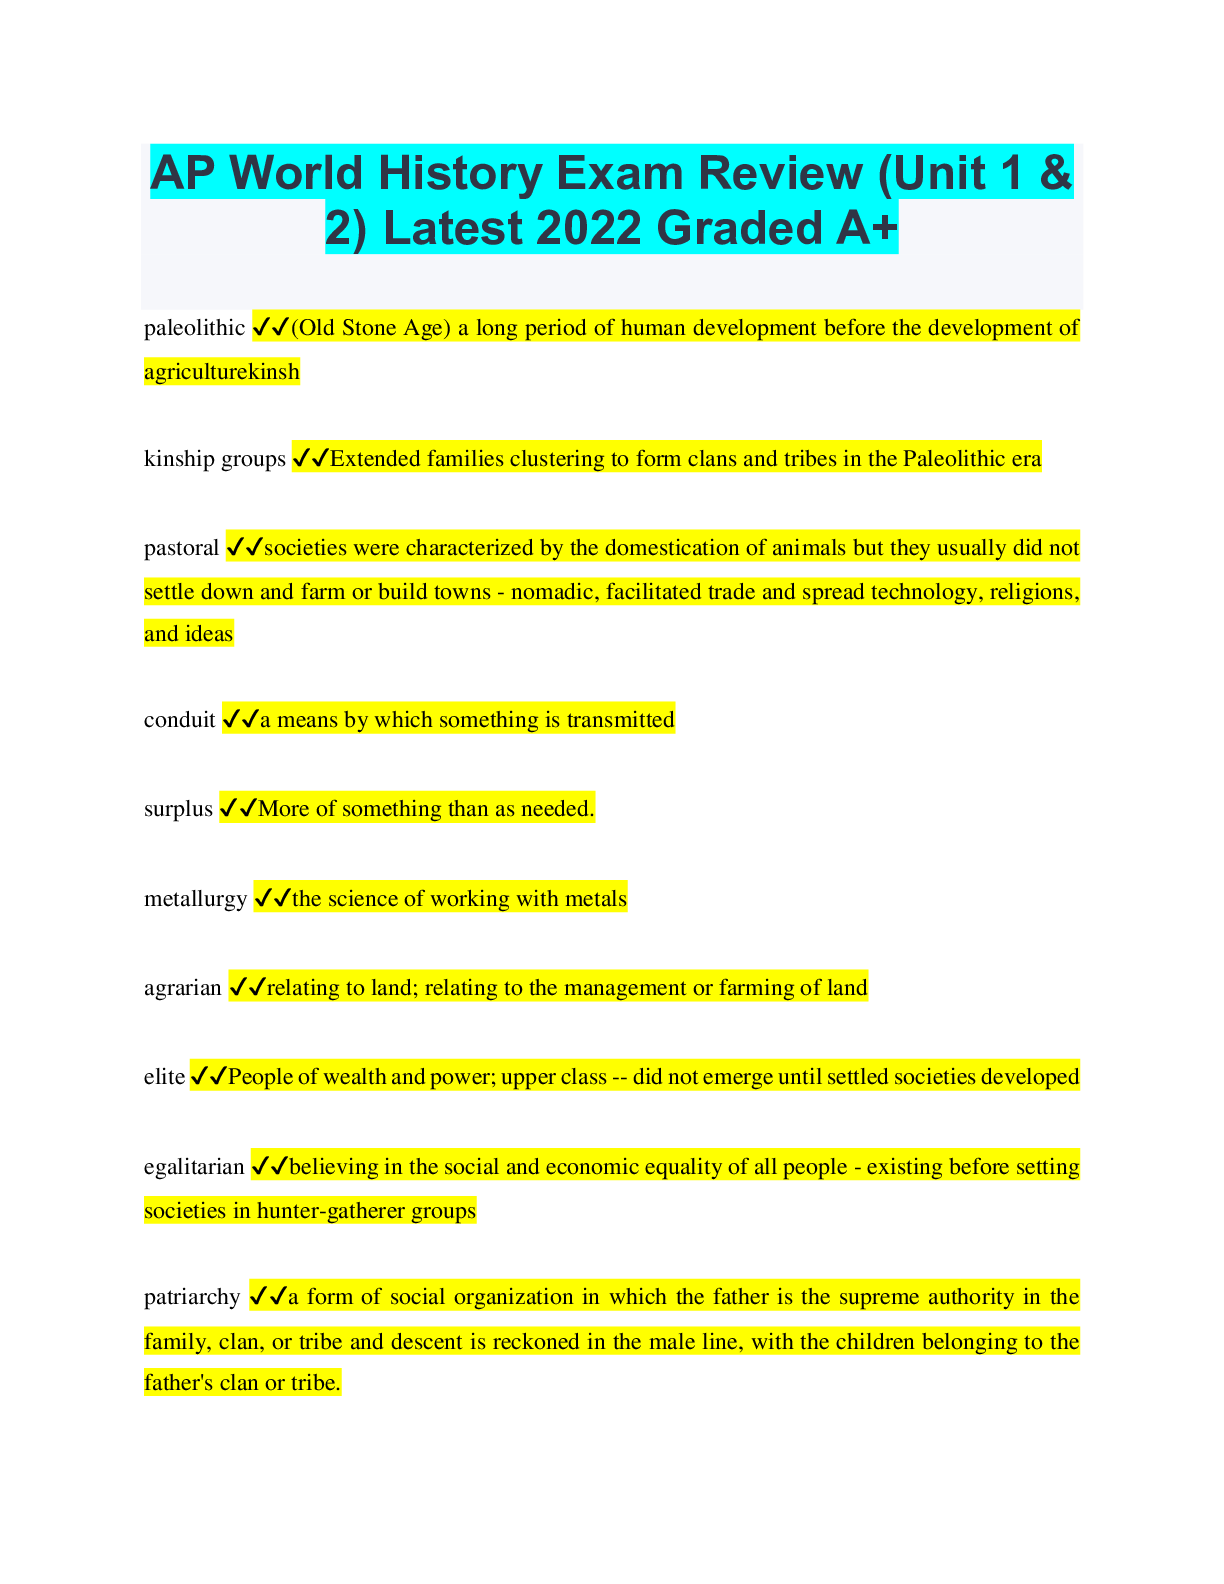 AP World History Exam Review (Unit 1 & 2) Latest 2022 Graded A+